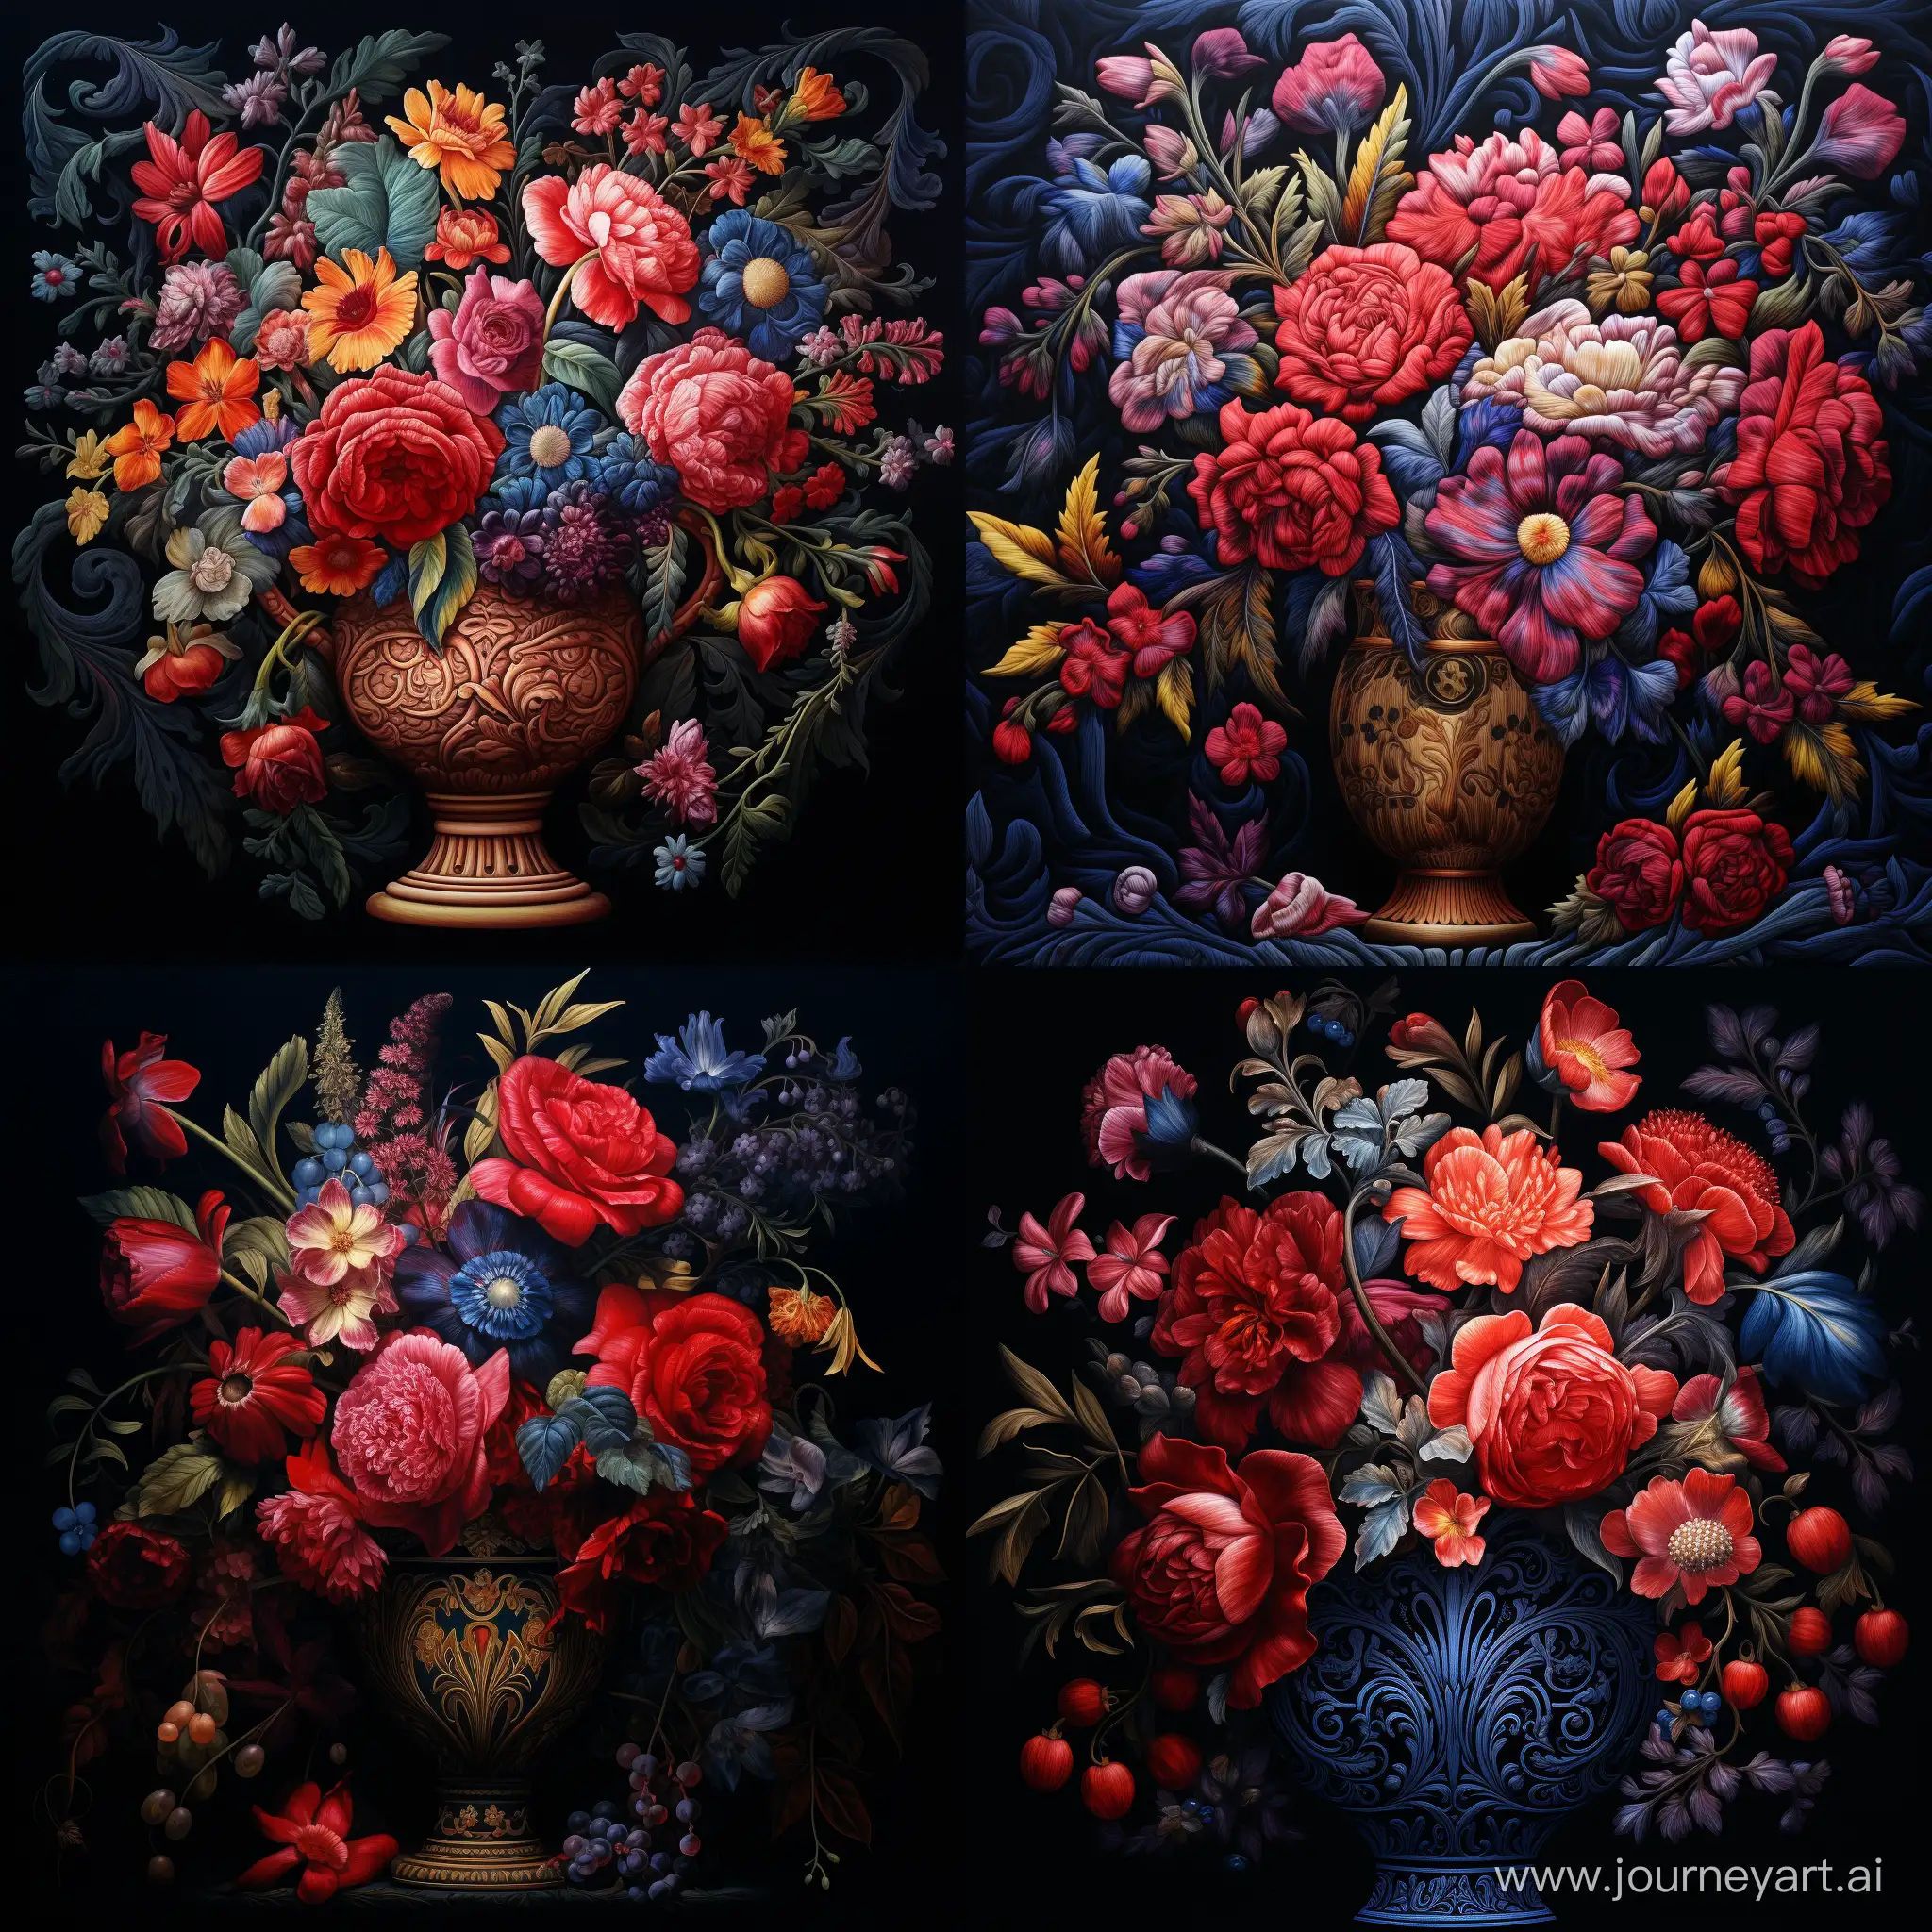 a painting of flowers in a vase, in the style of baroque ornate and dramatic compositions, realistic color schemes, embroidery, caravaggesque chiaroscuro, detailed wildlife, dark blue and red, ornate embroidery